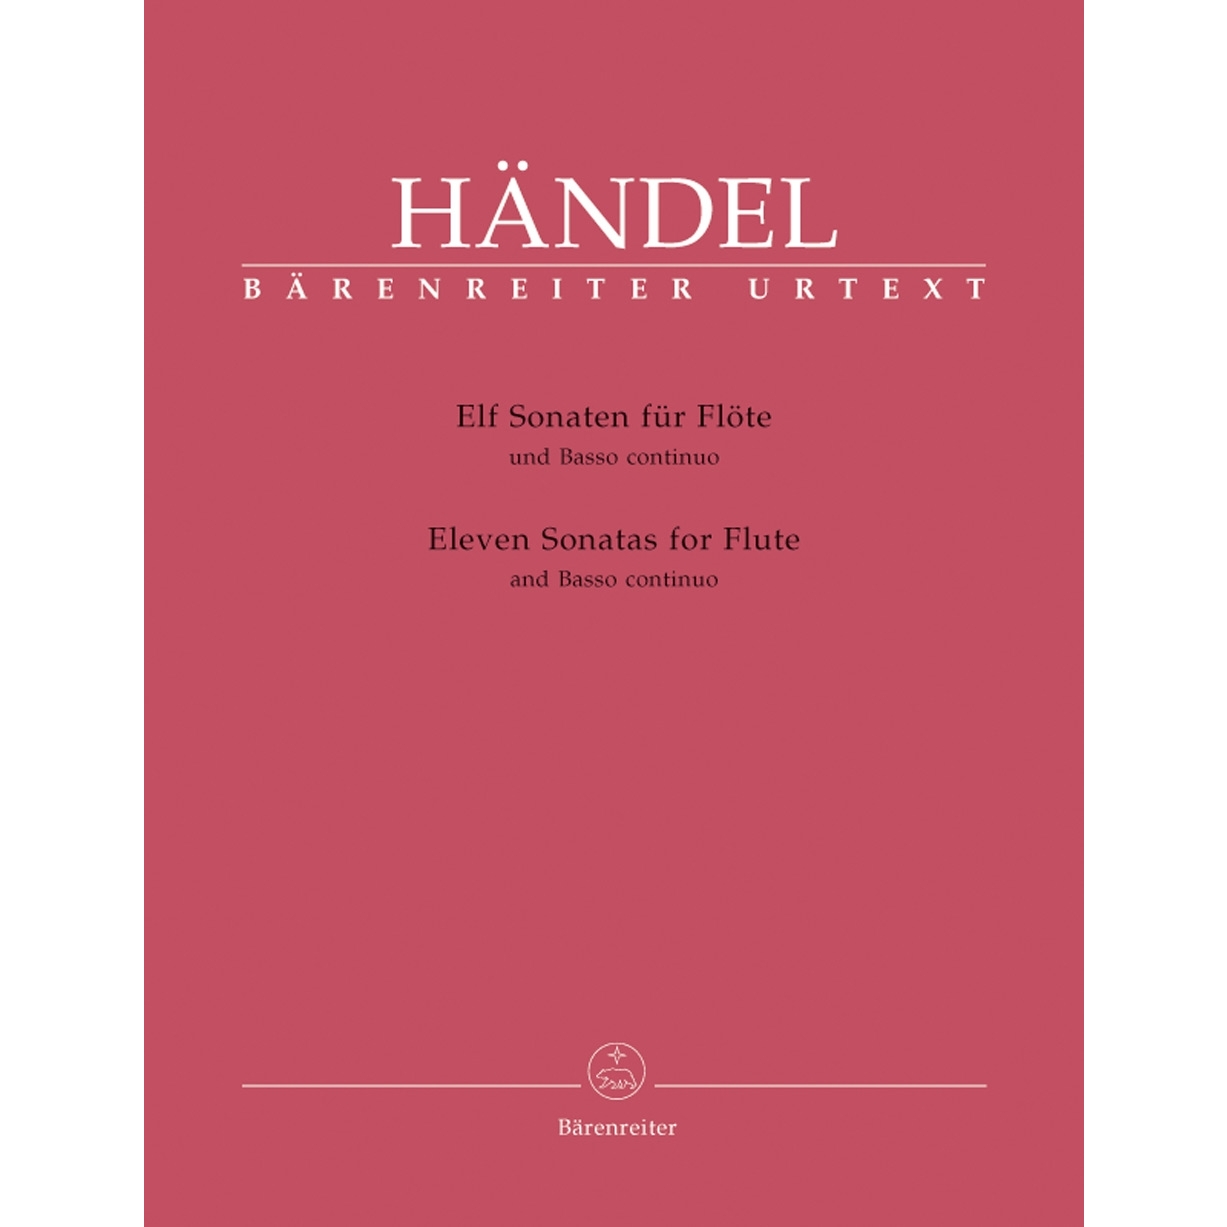 Eleven Sonatas for Flute and Flutes Continuo, - Händel. G.F. Just Op1 Basso